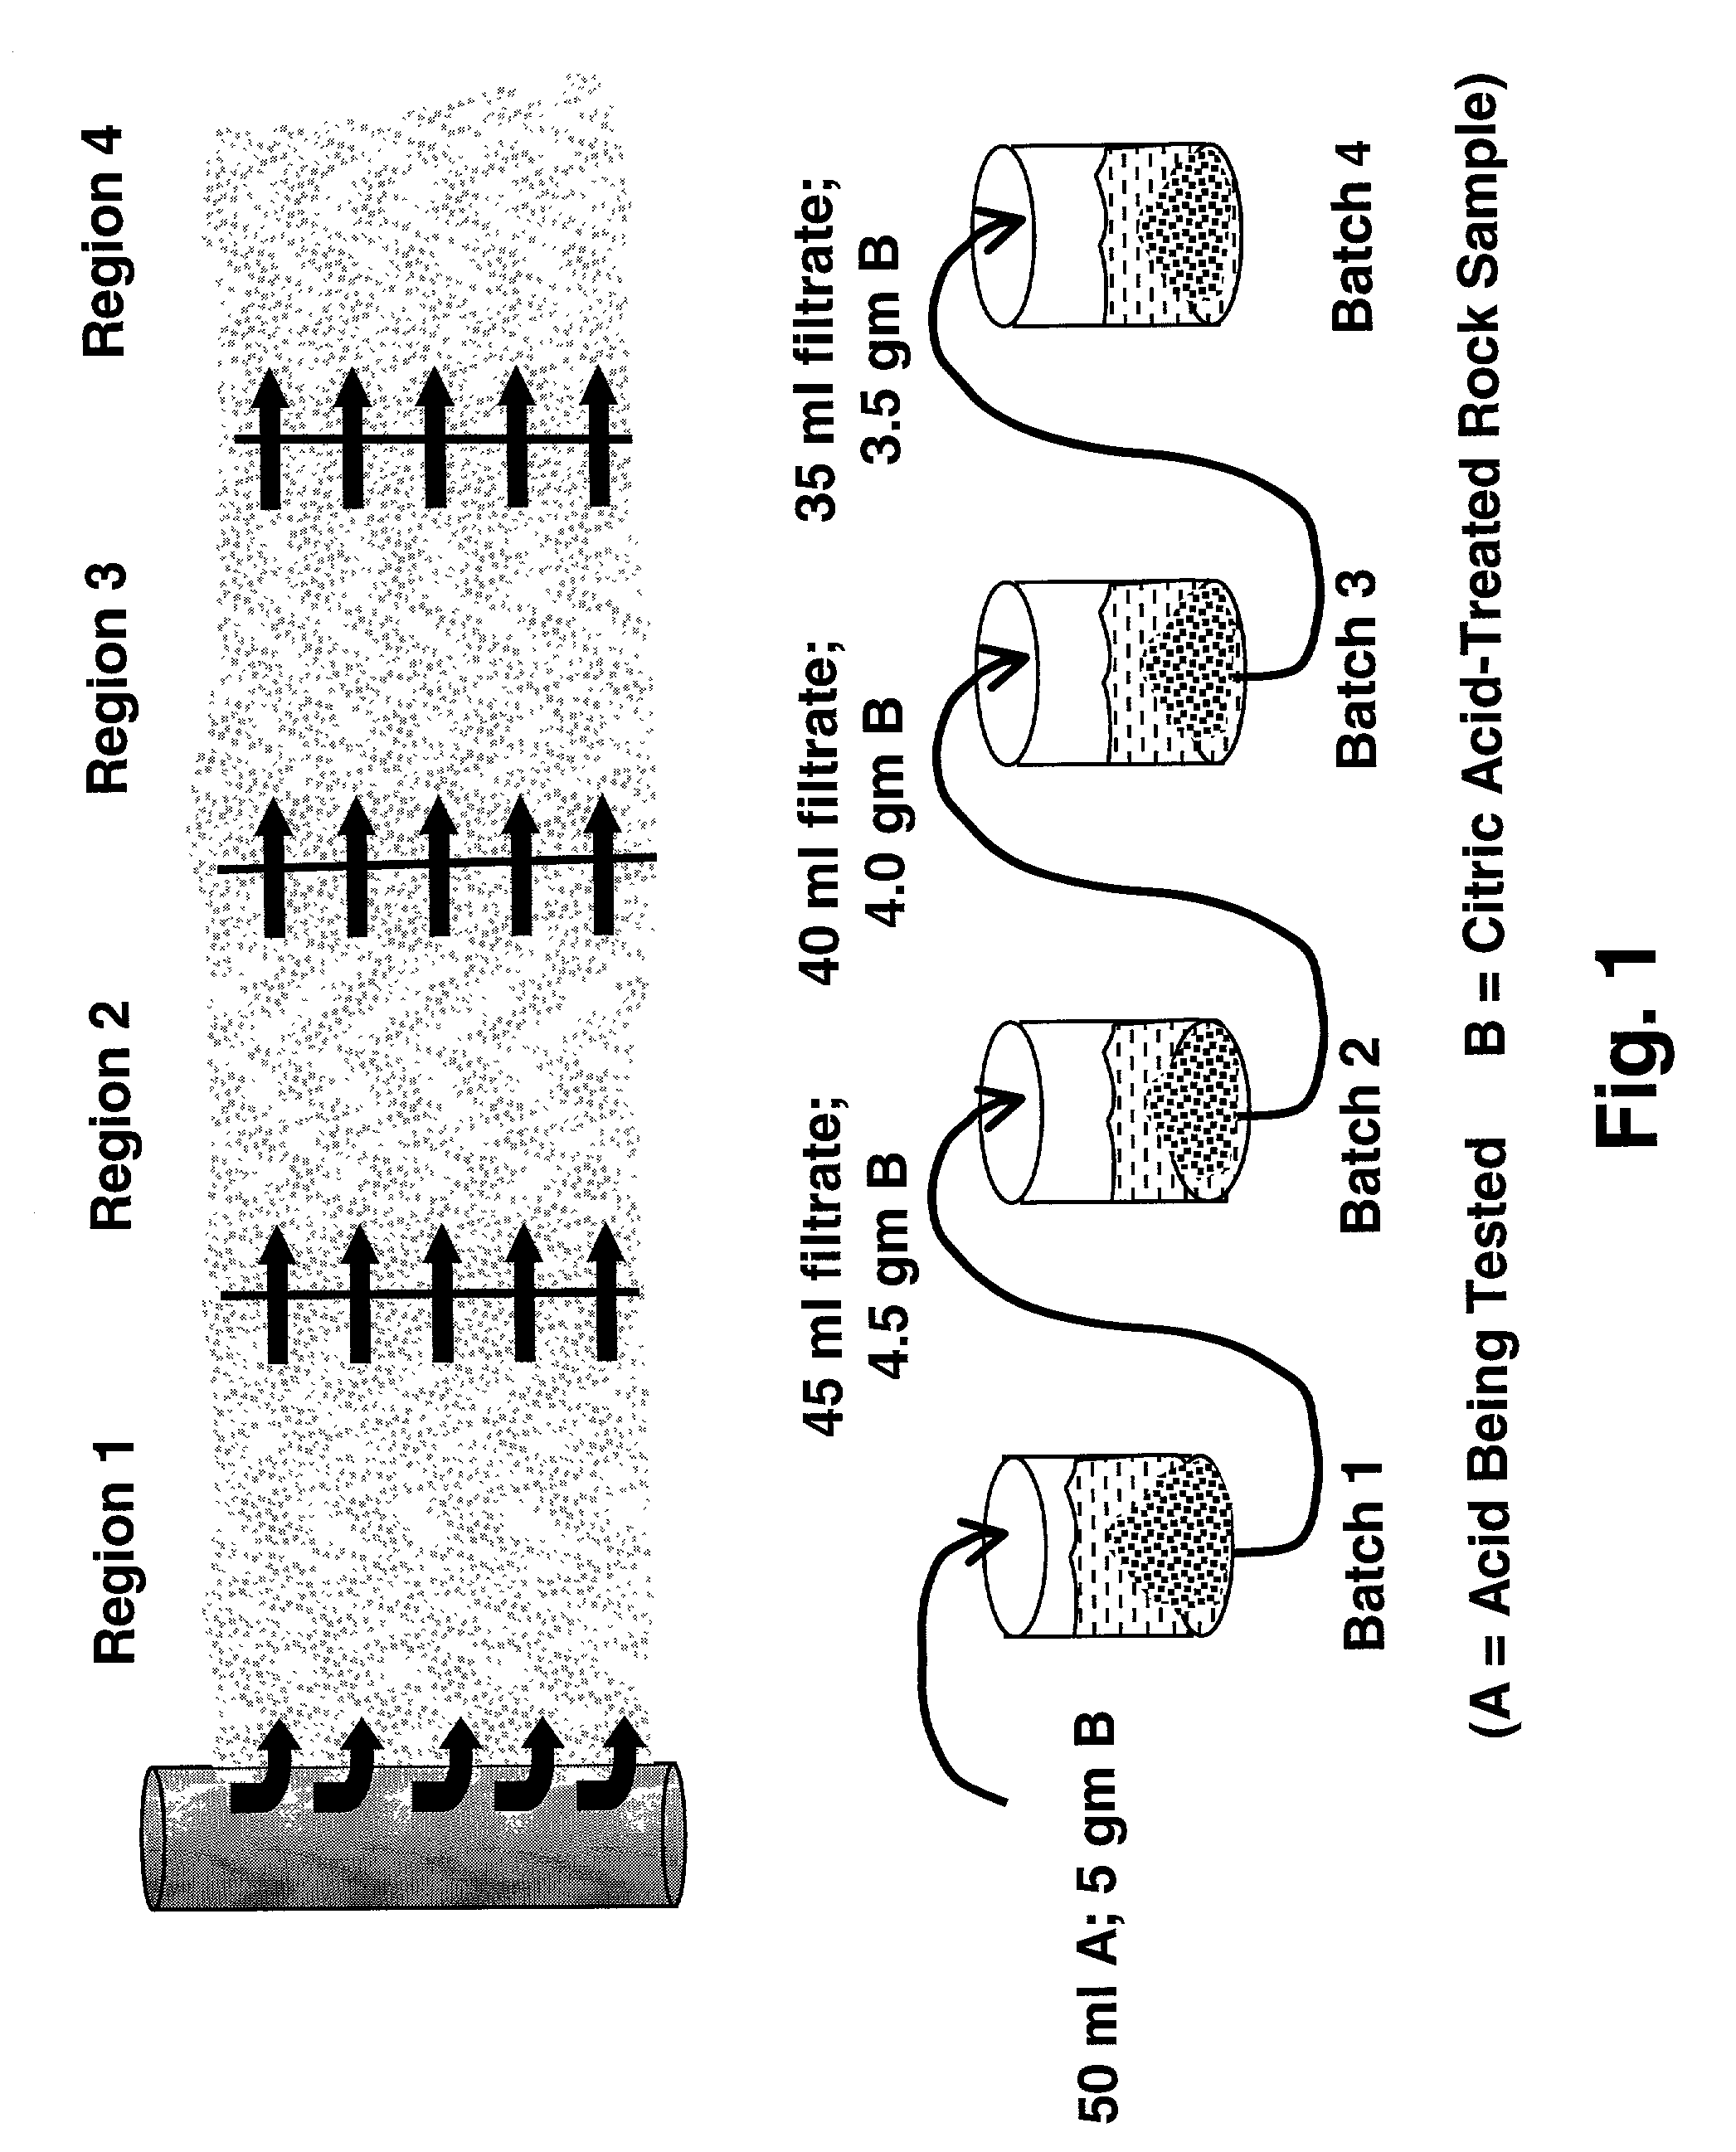 Composition and method for treating a subterranean formation